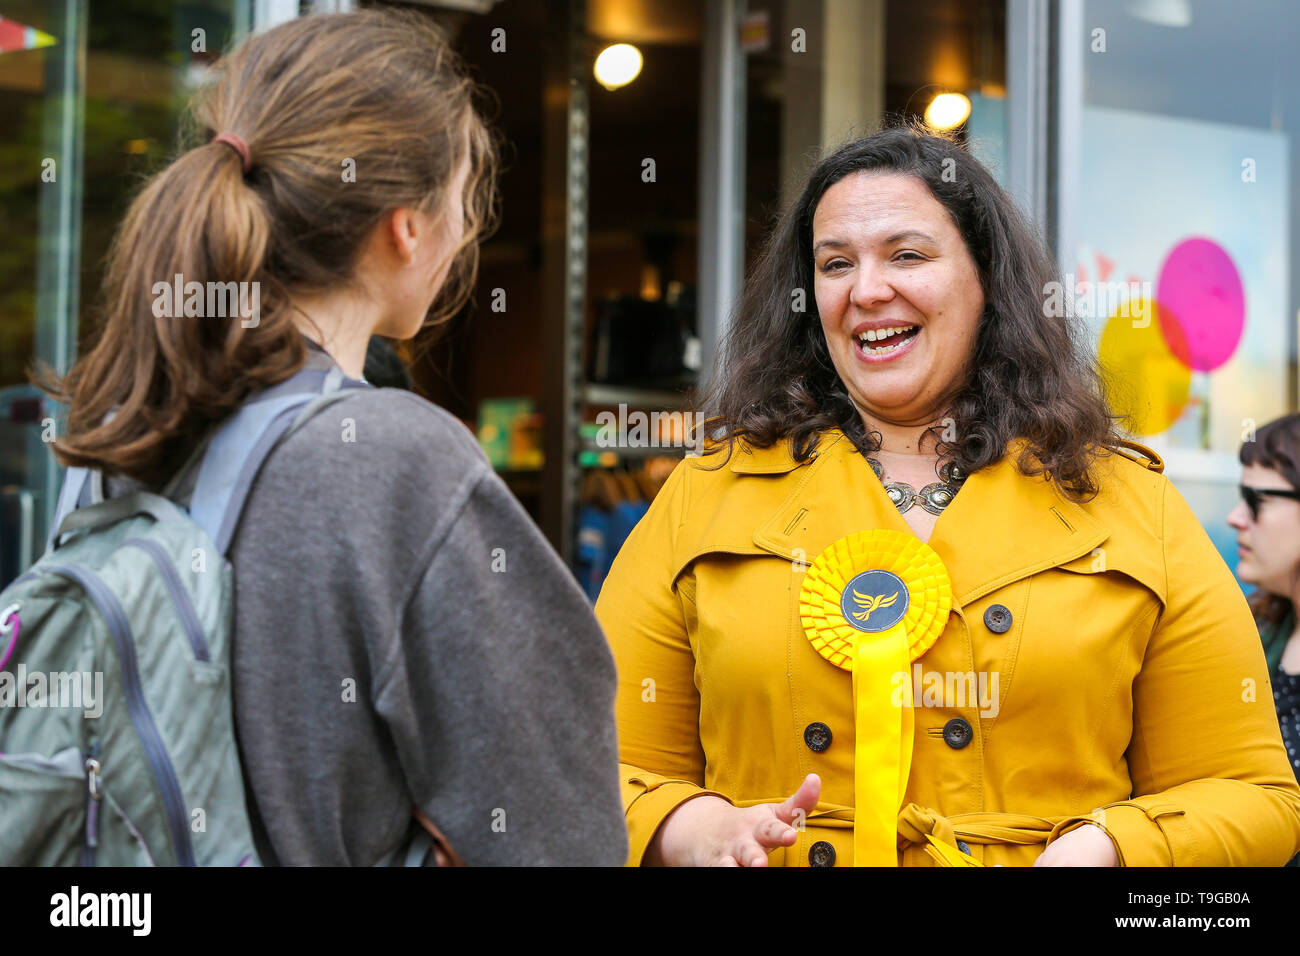 Liberal Democrats MEP candidate for London, Helen Cross is seen speaking with a member of the public during her campaigning in Islington, north London for the forthcoming European Parliament election. Stock Photo